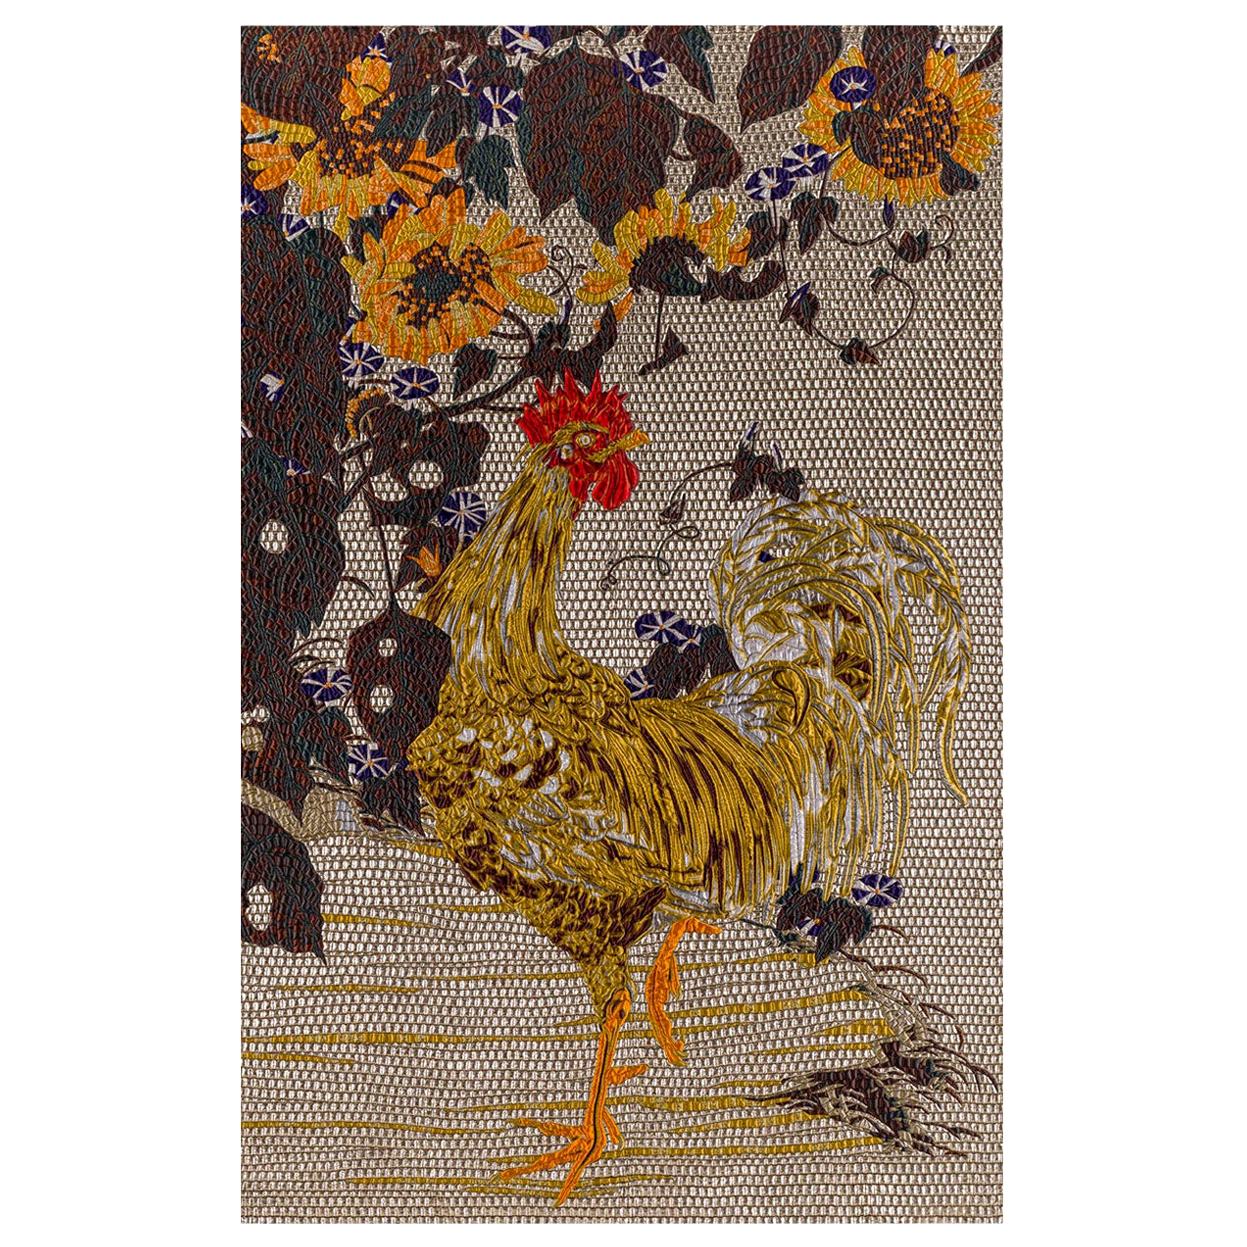  Fabric Tapestry with Rooster Design Upholstered Panel on Demand For Sale